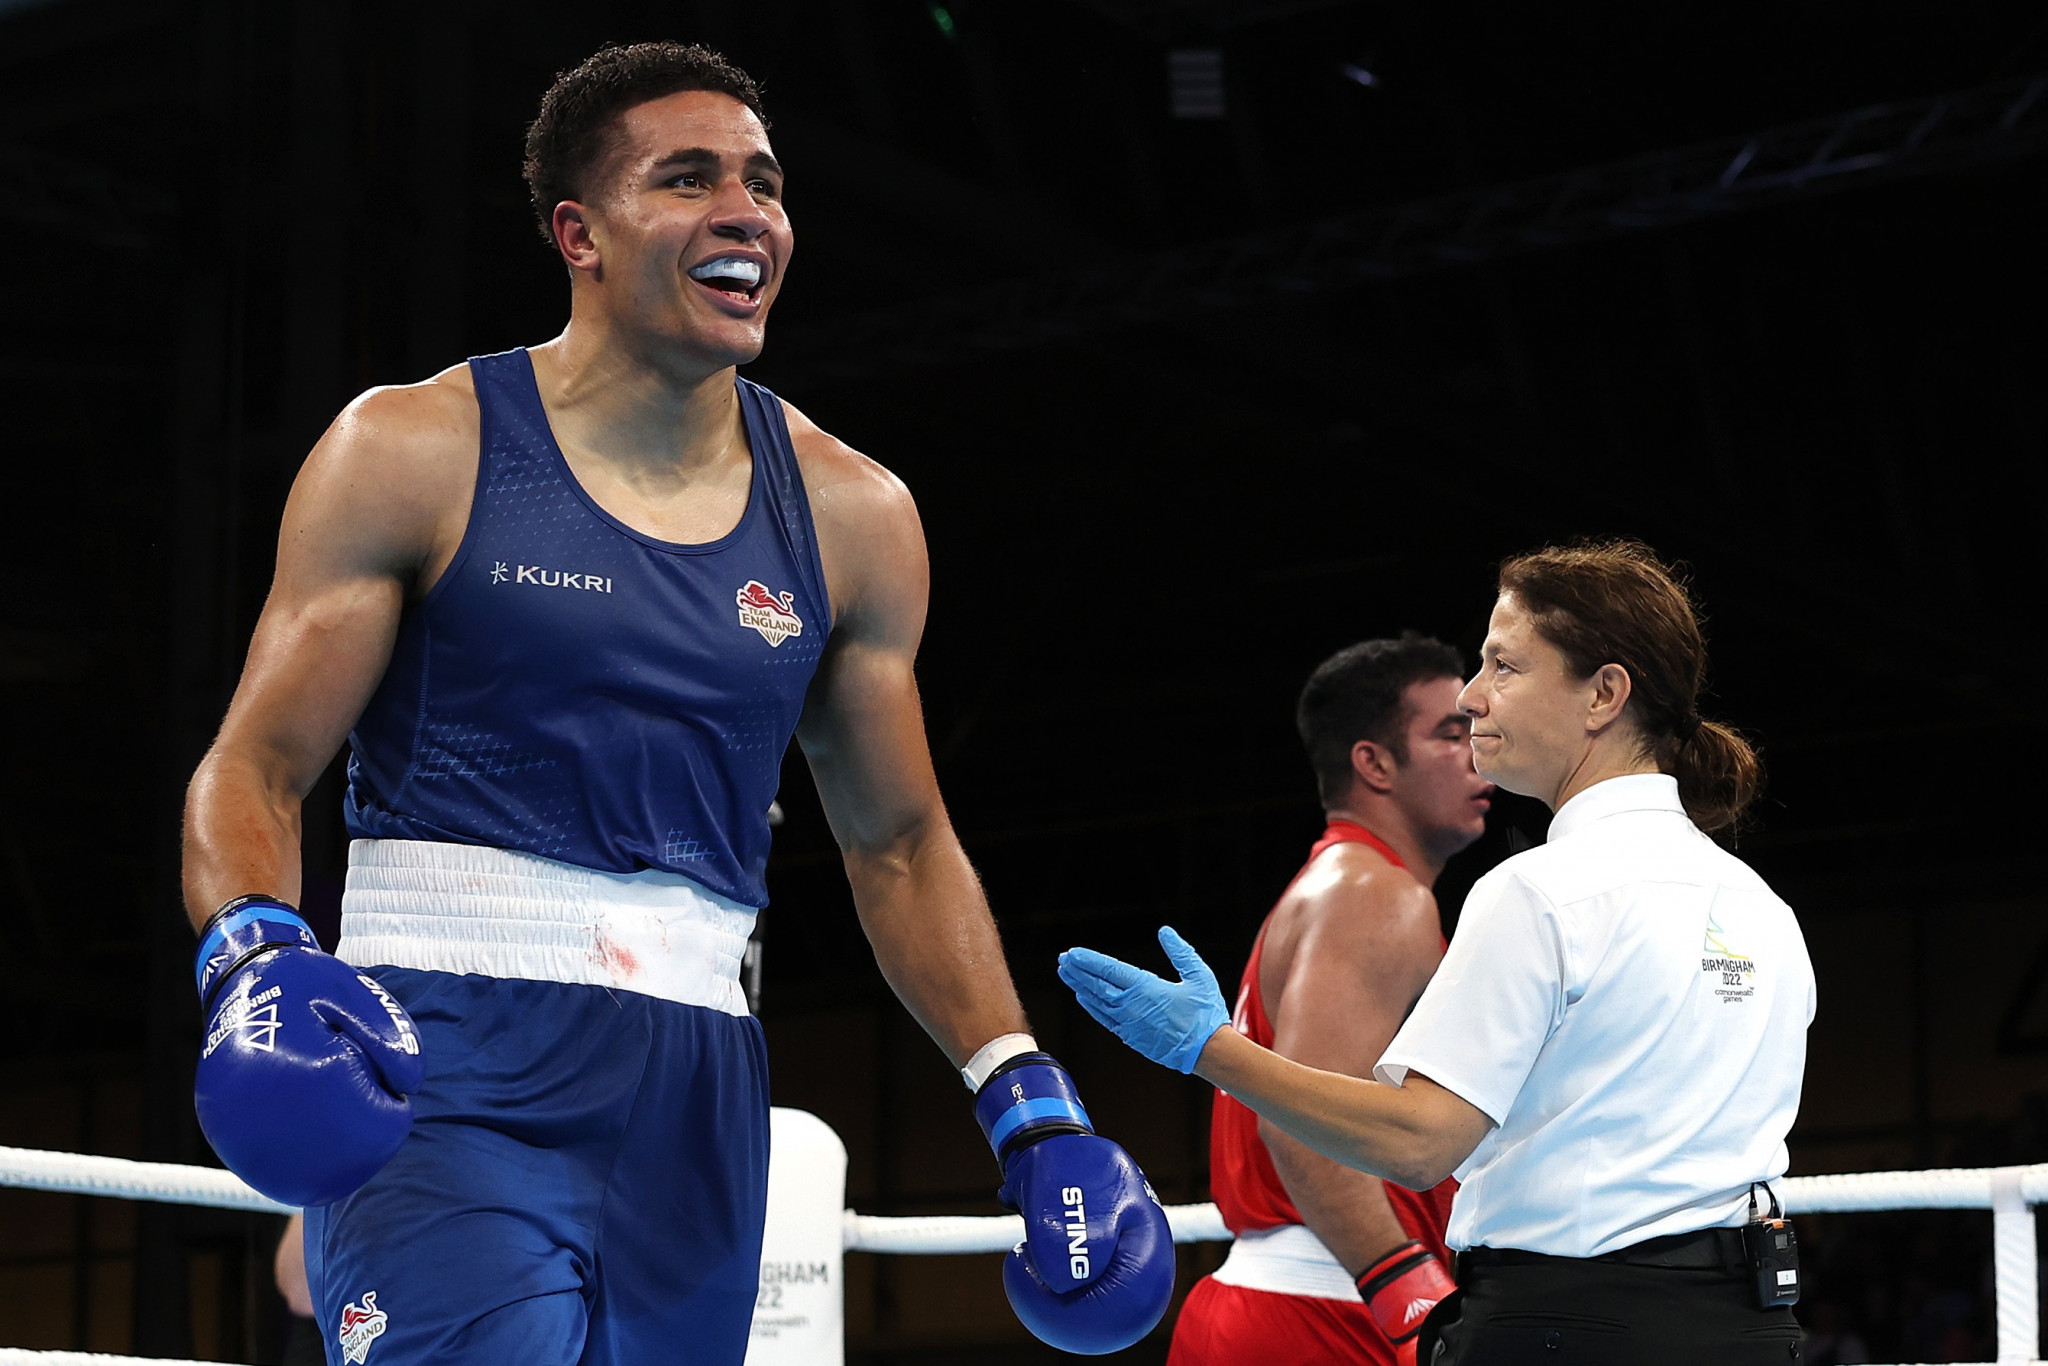 Commonwealth Games champion Delicious Orie will be among Britain's boxers bidding for success in Poland later this month ©Getty Images